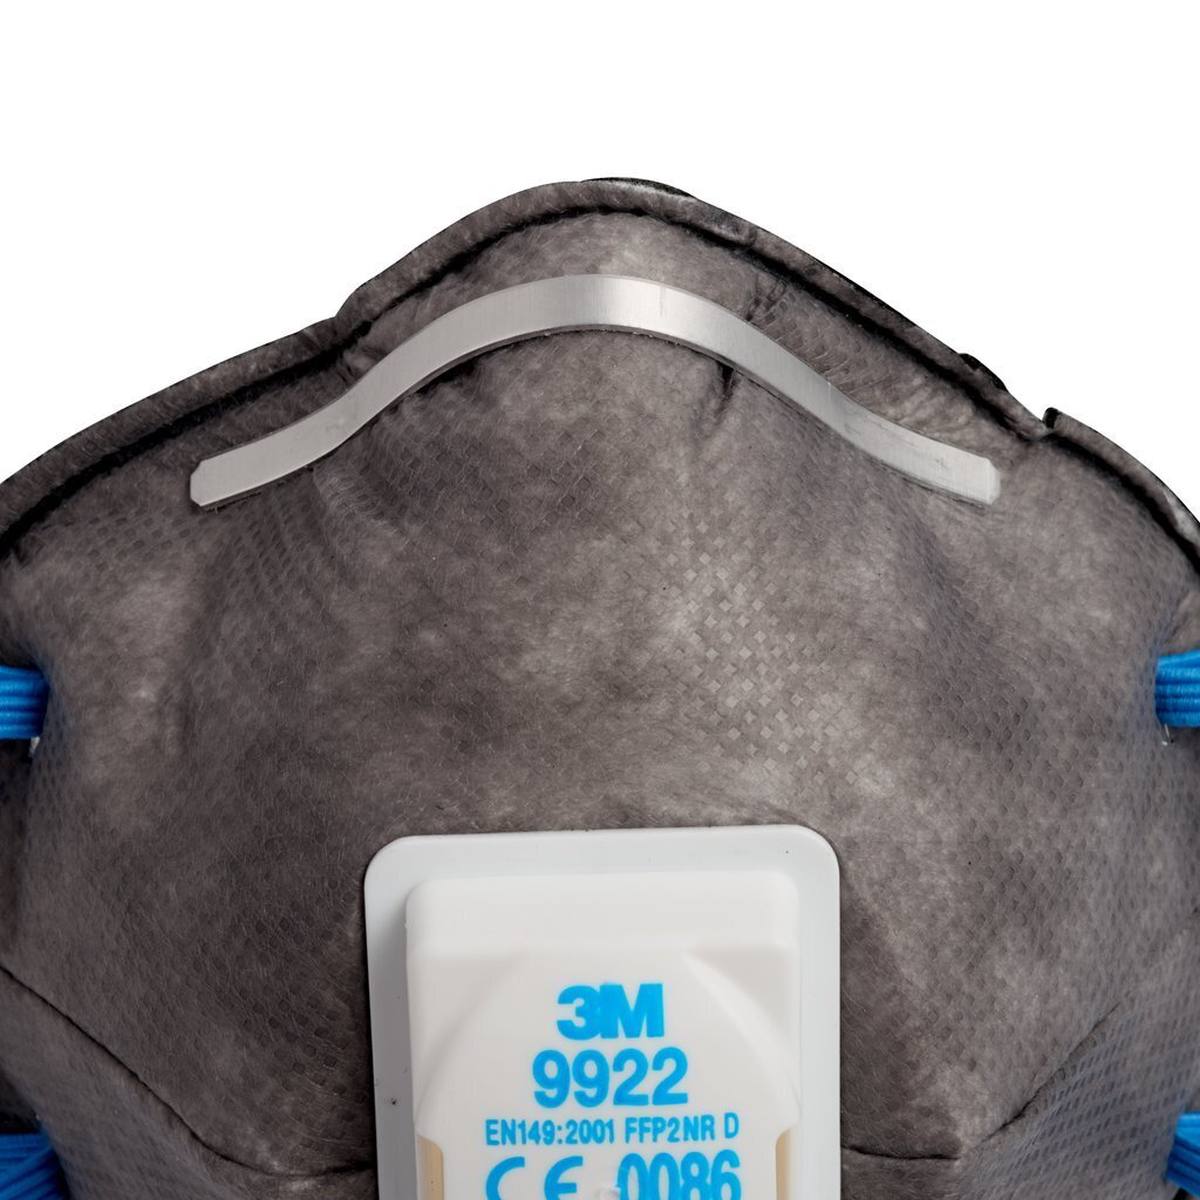 3M 9922 FFP2 odor protection mask with cool-flow exhalation valve, against solid particles and liquid, non-volatile aerosols, up to 10 times the MAK value for ozone and against unpleasant organic odors (below MAK)